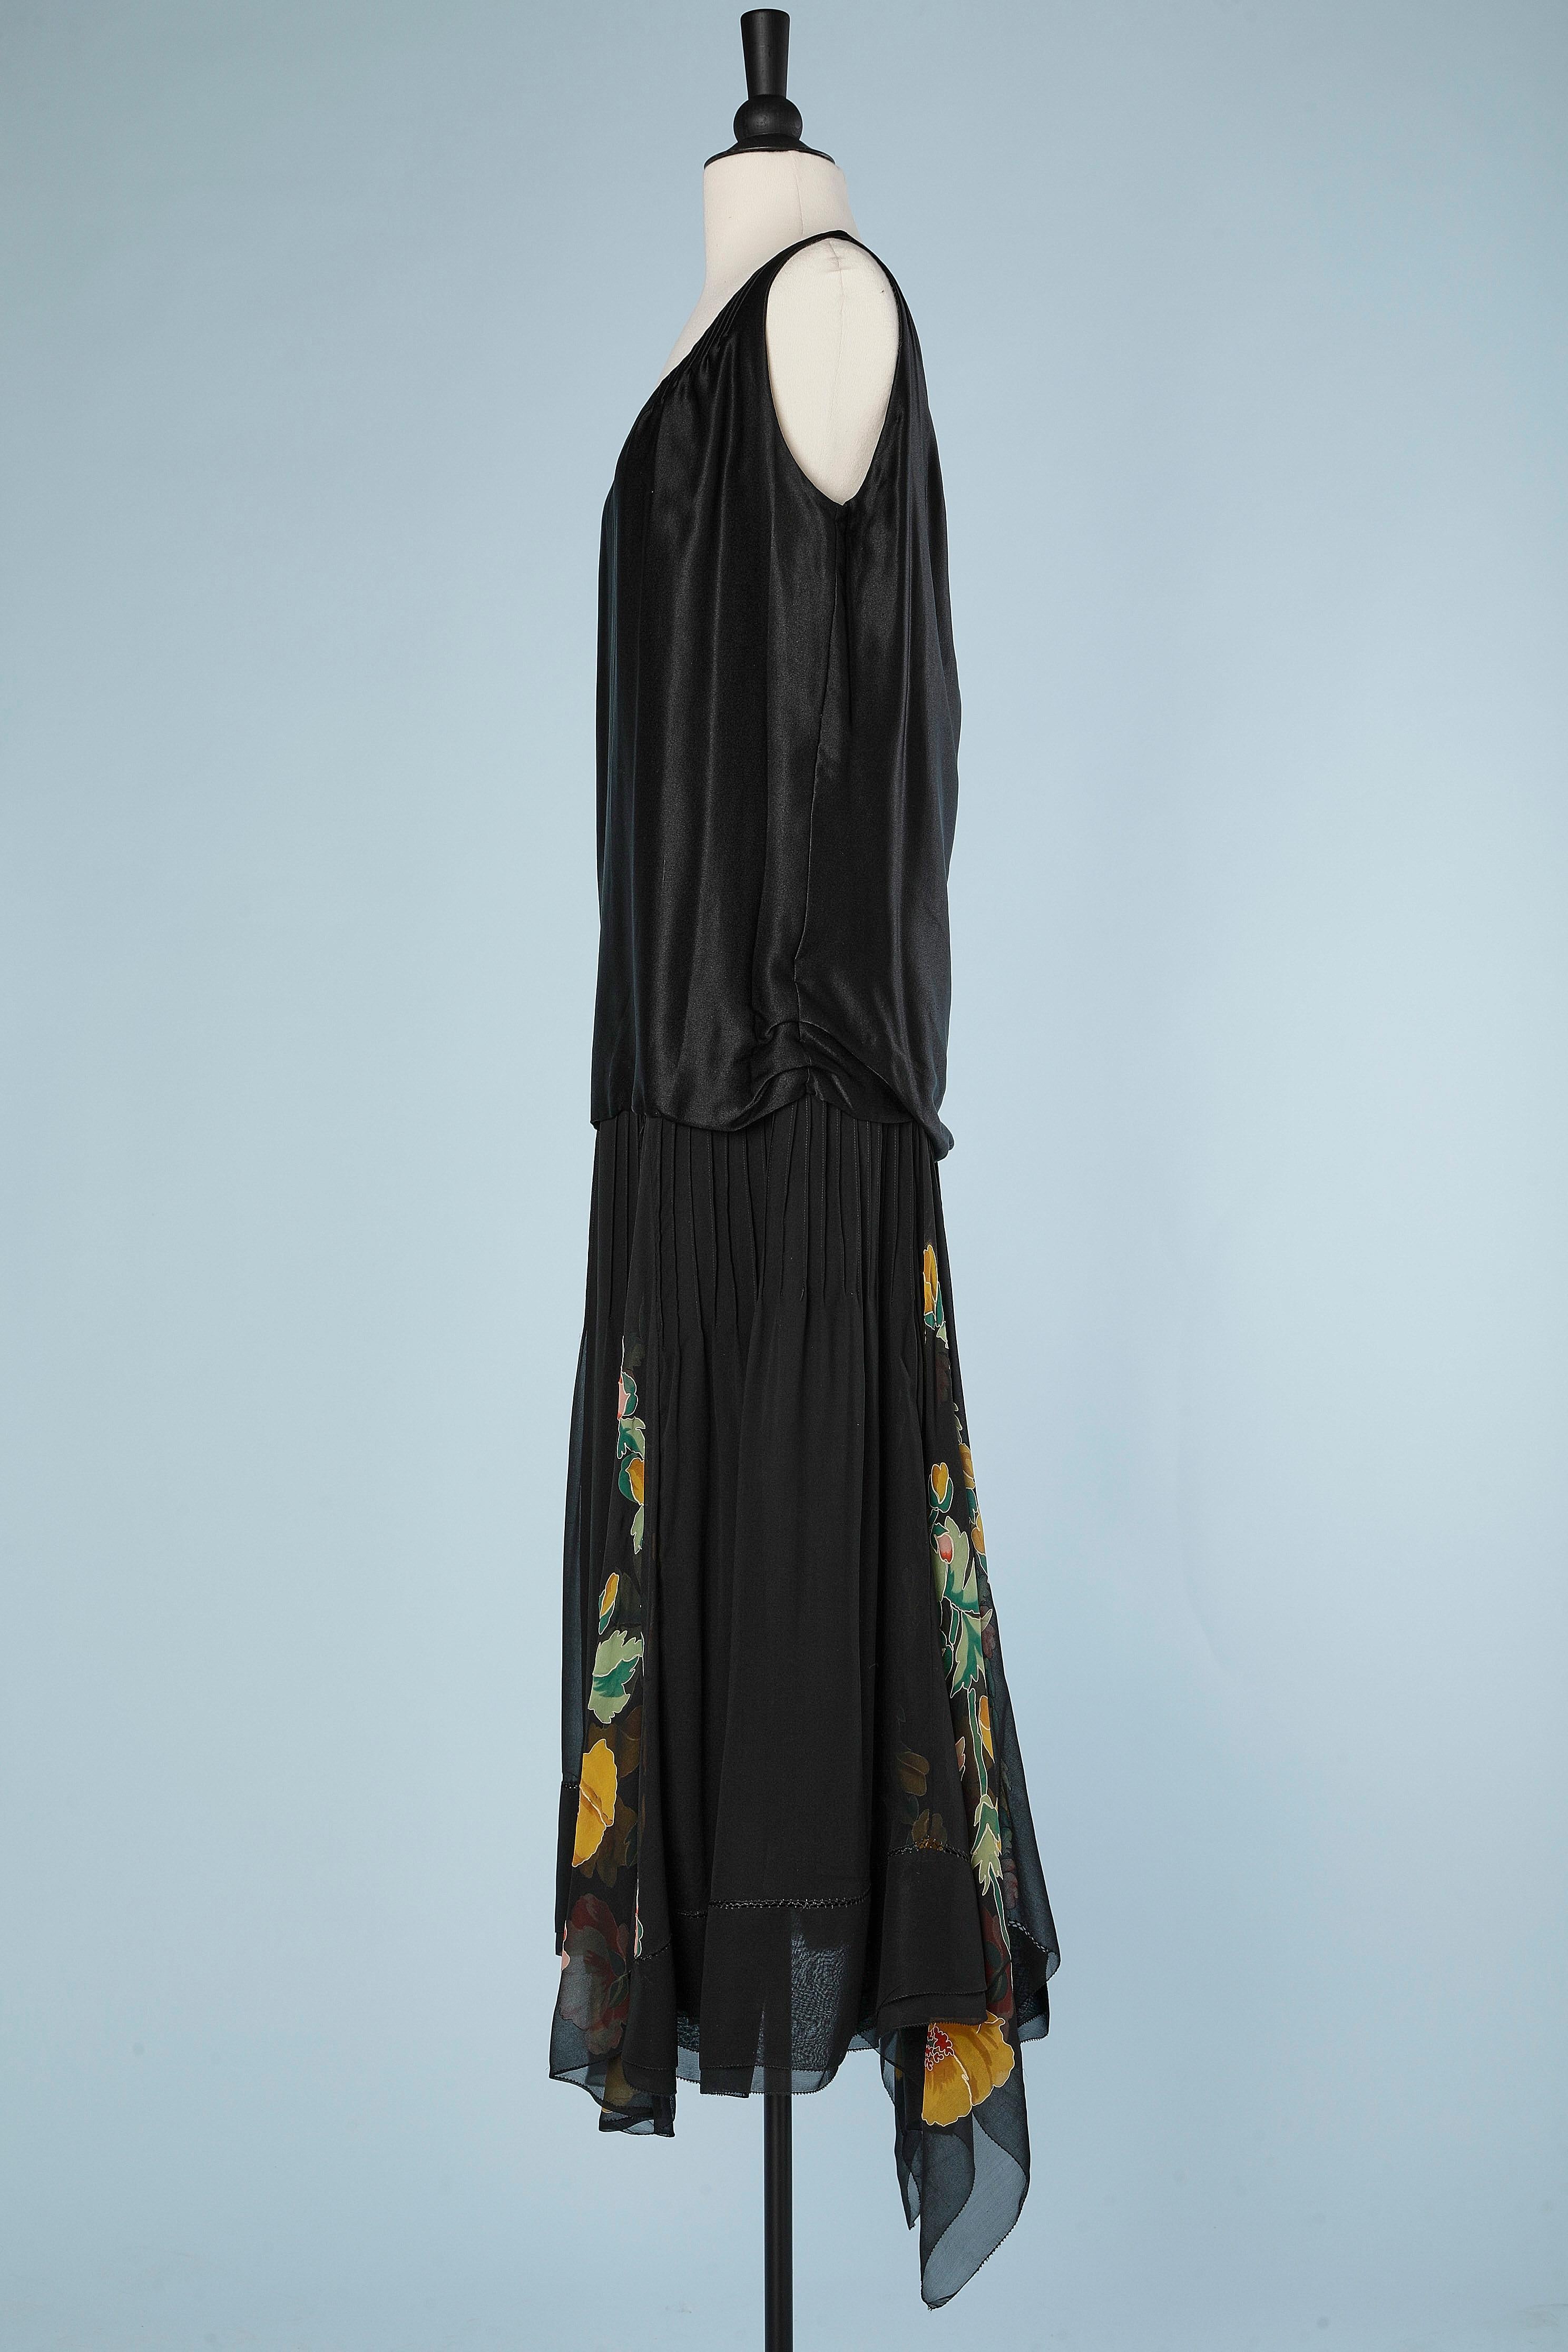 Women's Asymmetrical black satin and printed and flowers embroidered crêpe Circa 1920